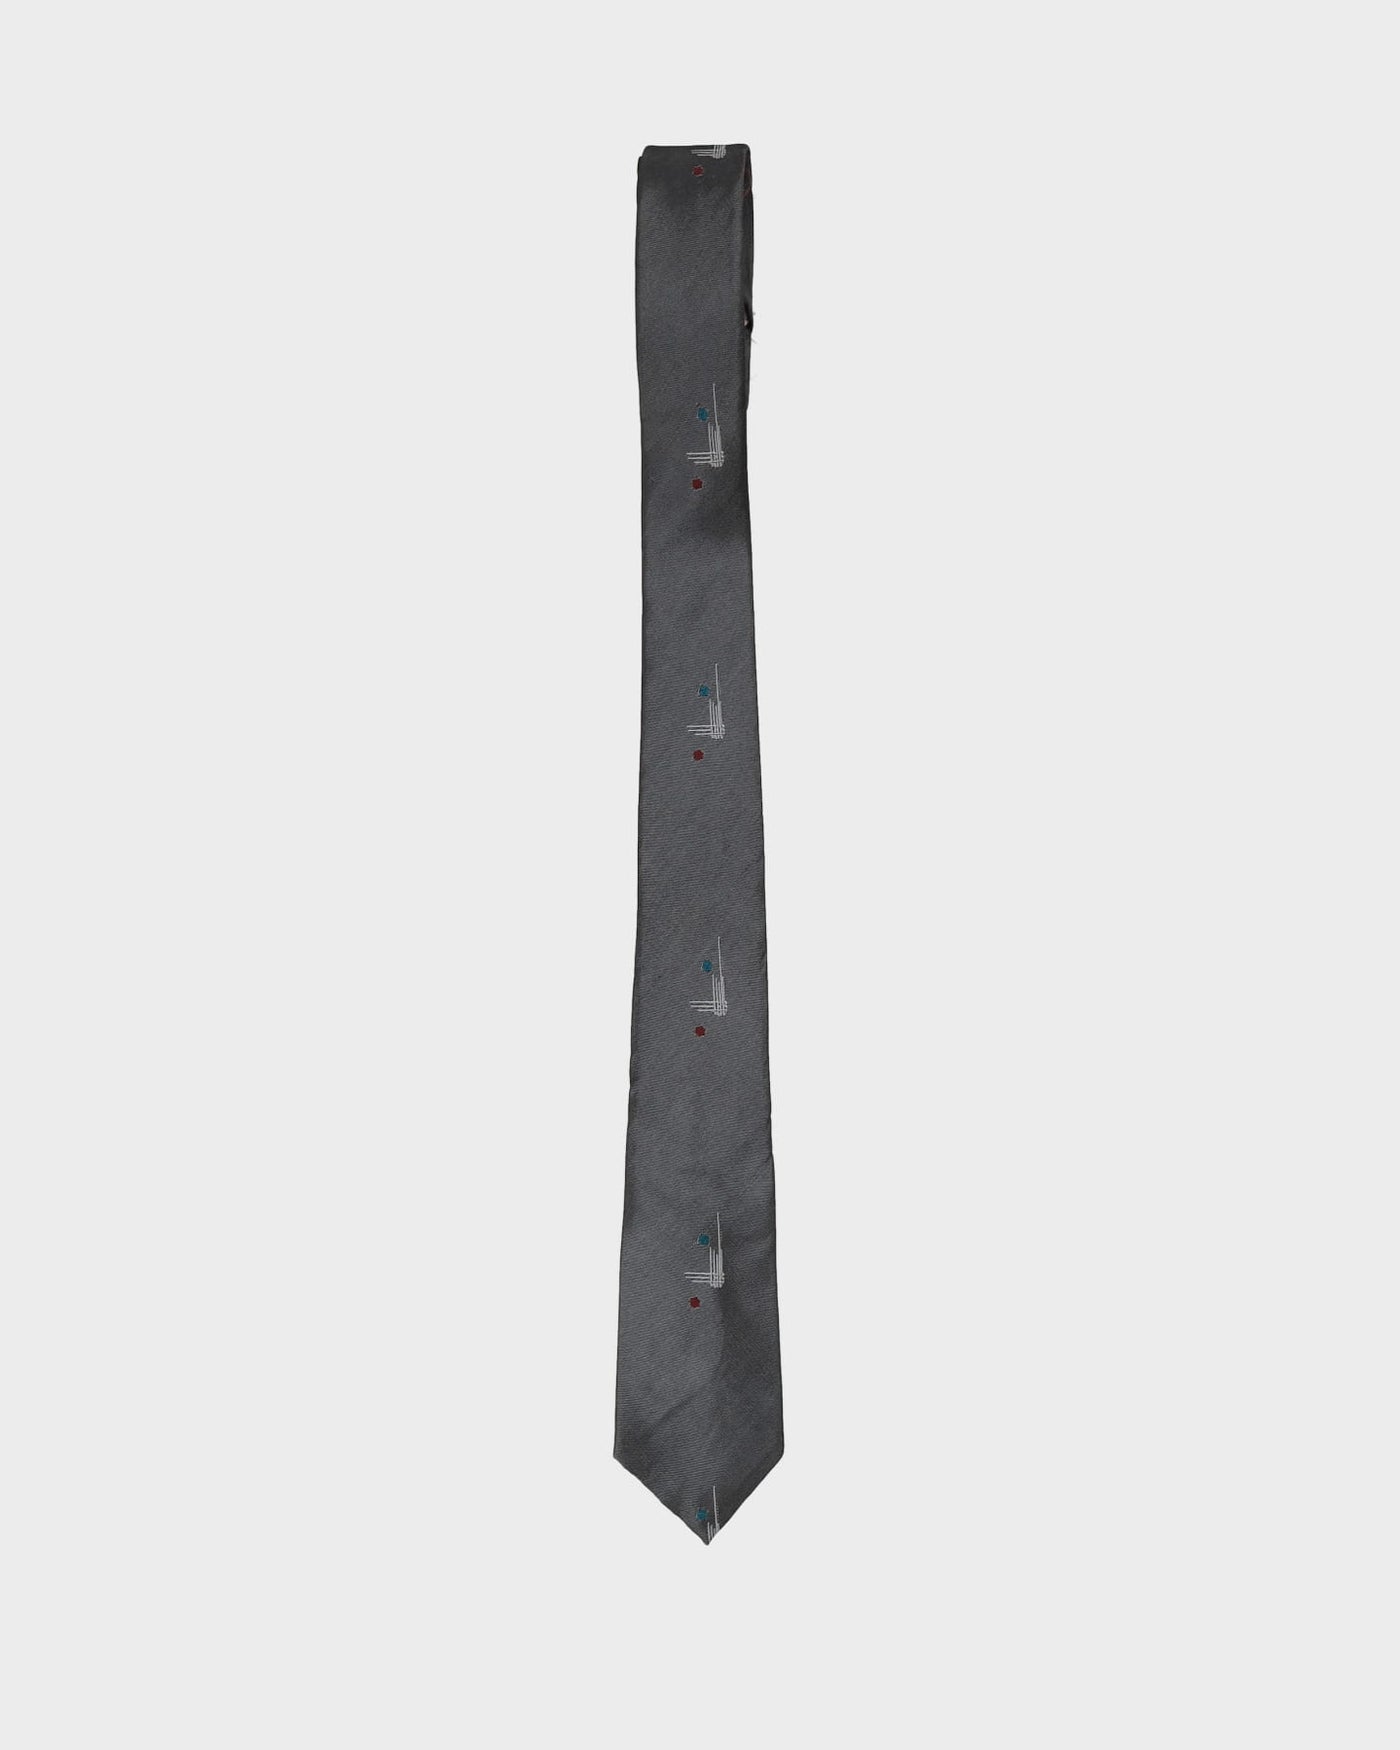 00s Christian Dior Grey / Silver Patterned Tie